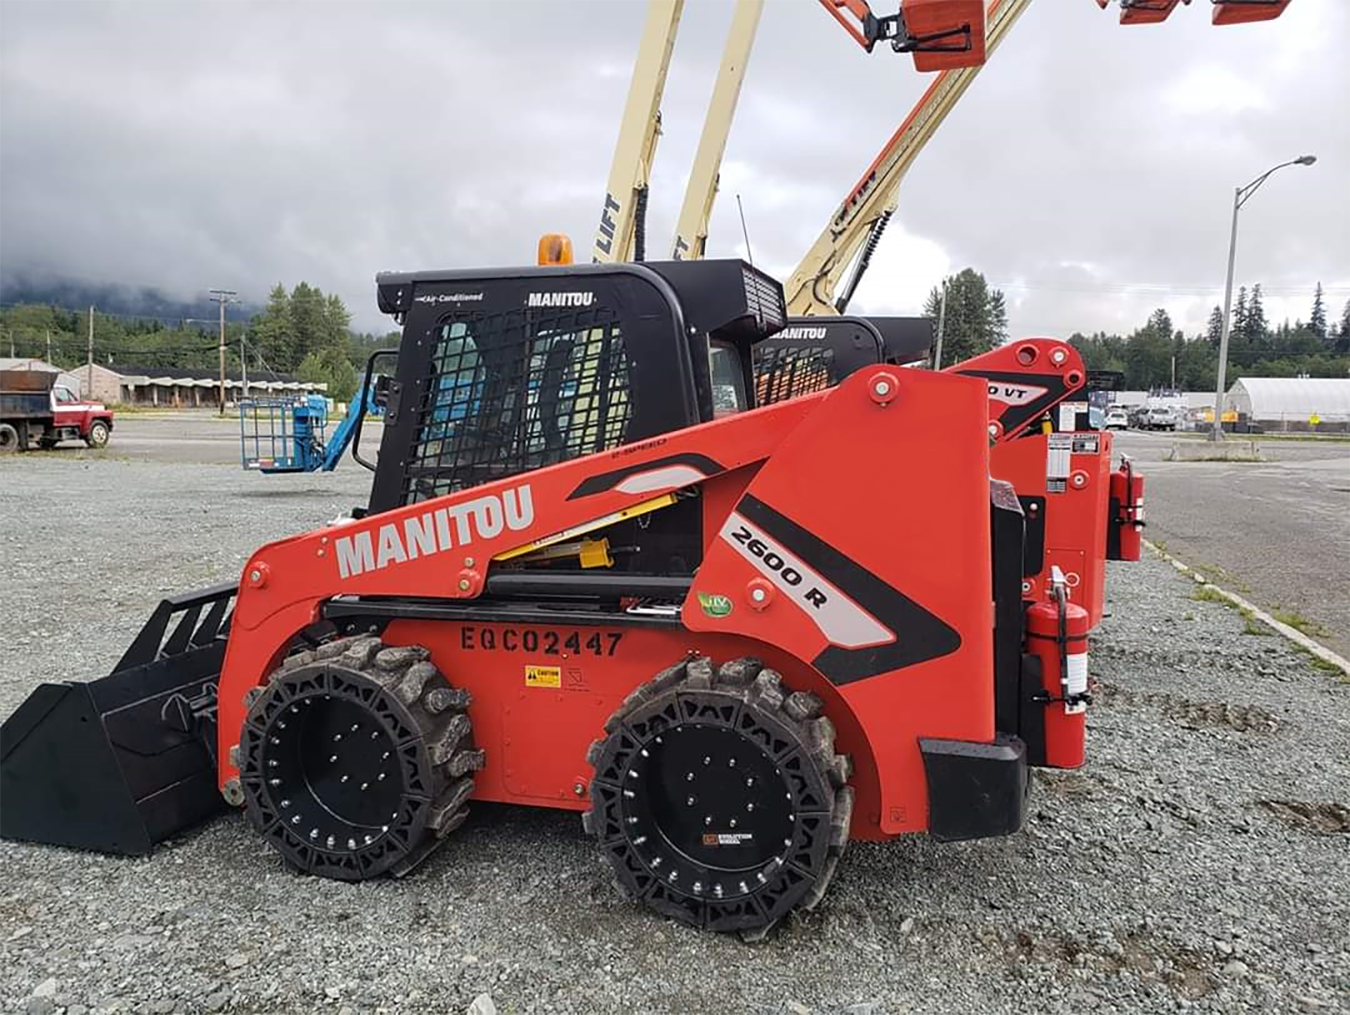 This image is about a Red Manitou Skid Steer using our all terrain skid steer tires.